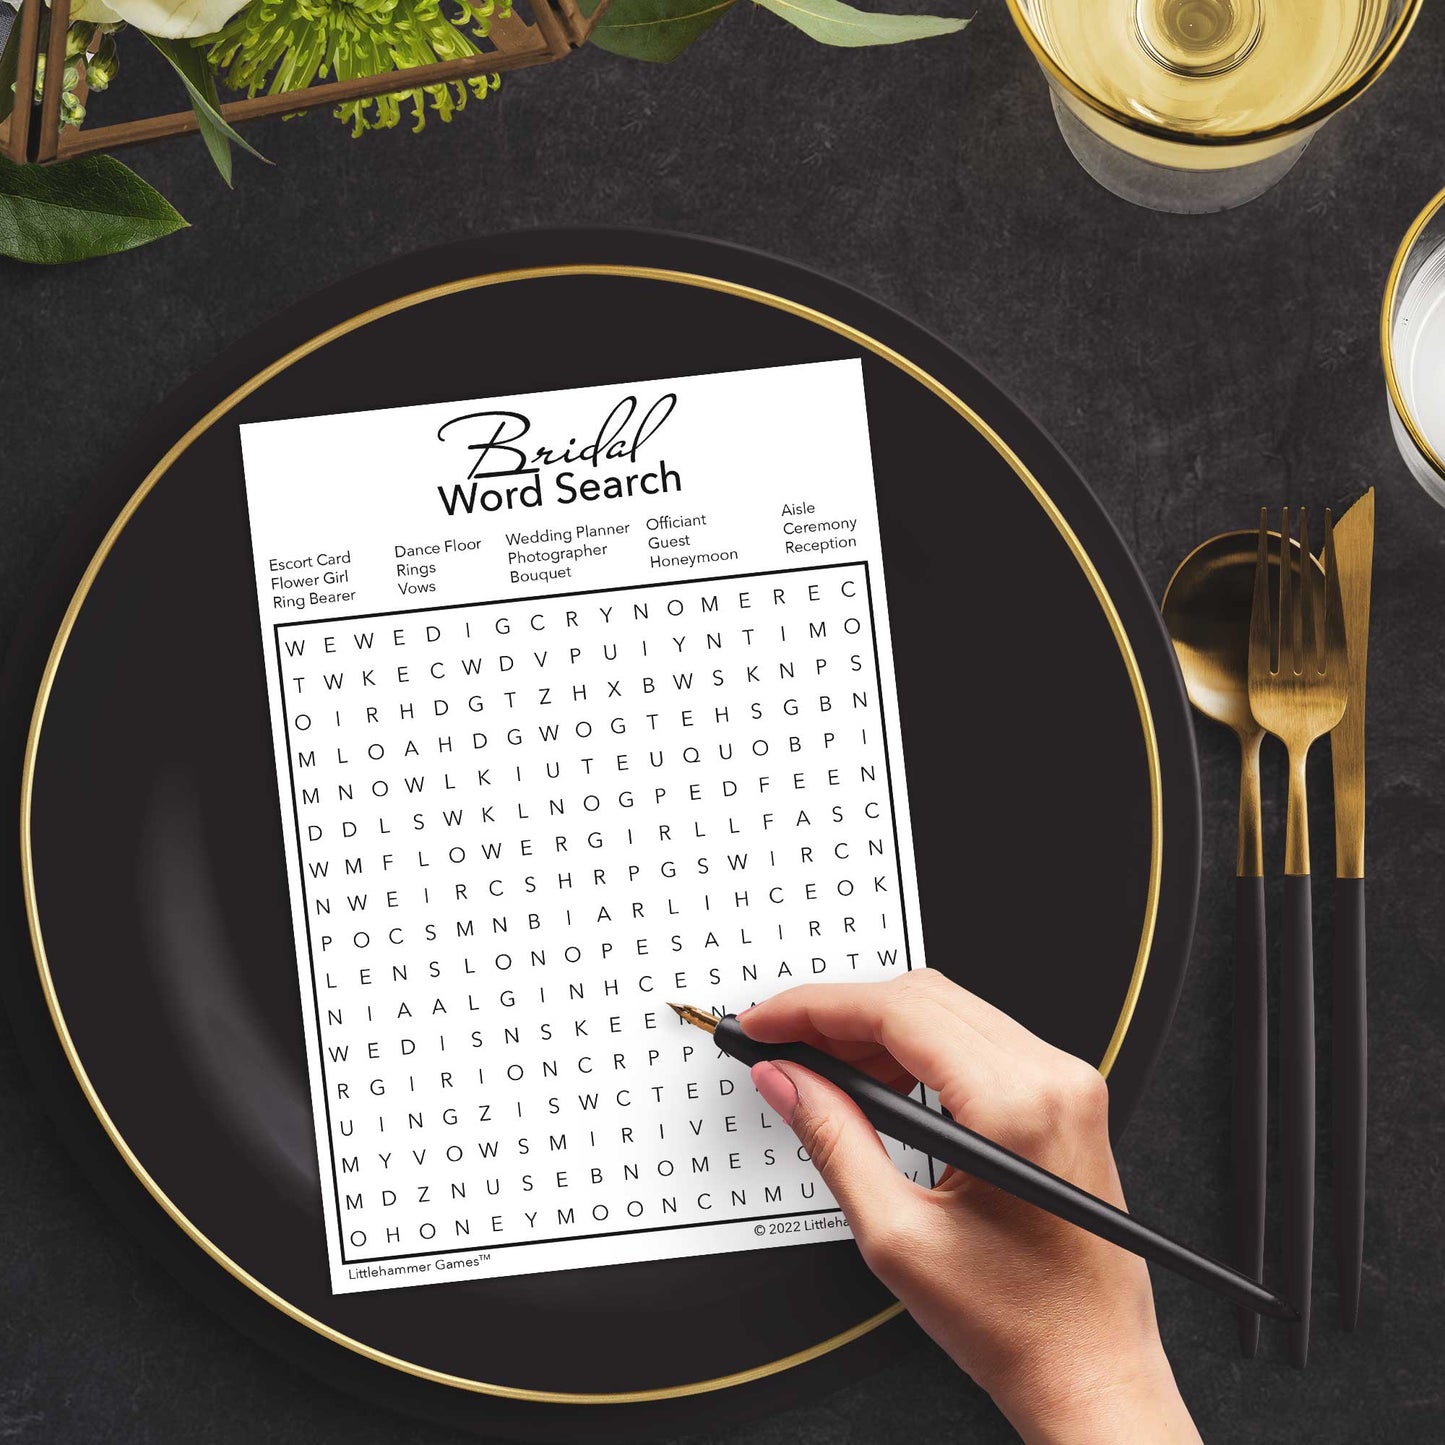 Woman with a pen playing a black and white Bridal Word Search game card at a dark place setting